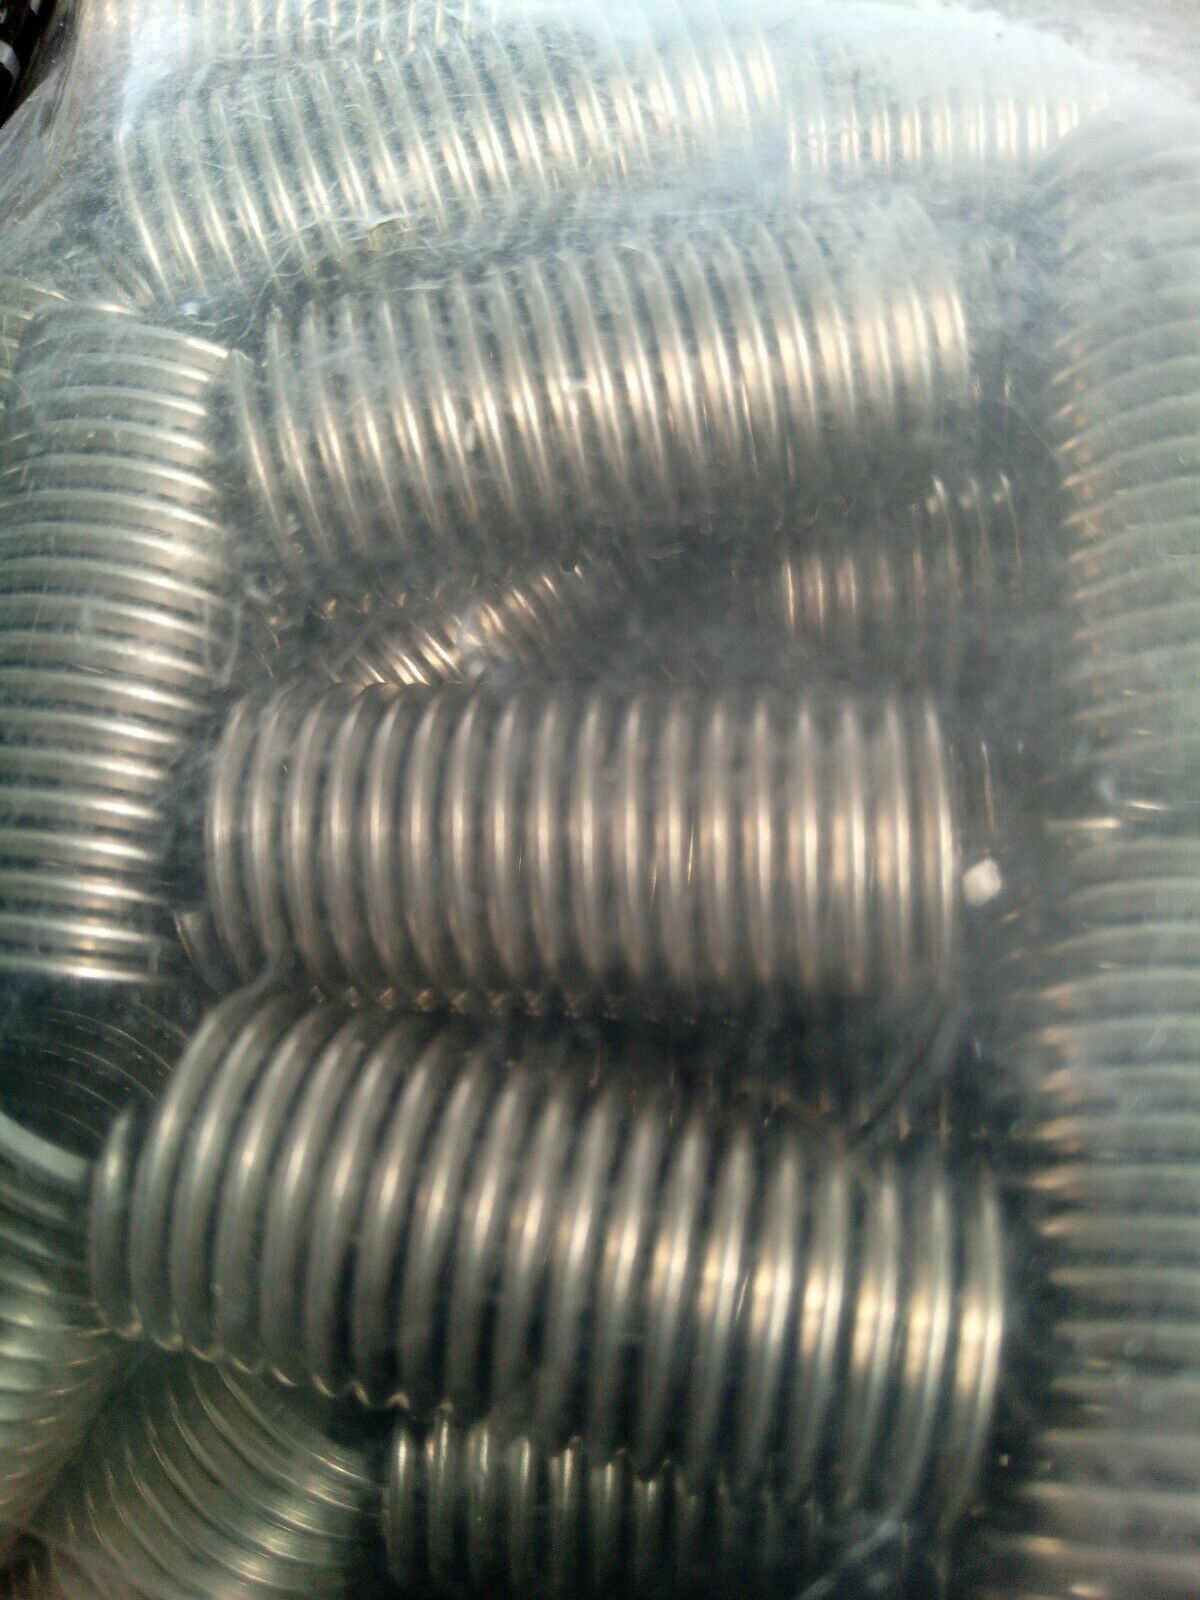 V-Coil Insert M12 x 1.75 X  3D  Compatable with Helicoil.singles. German